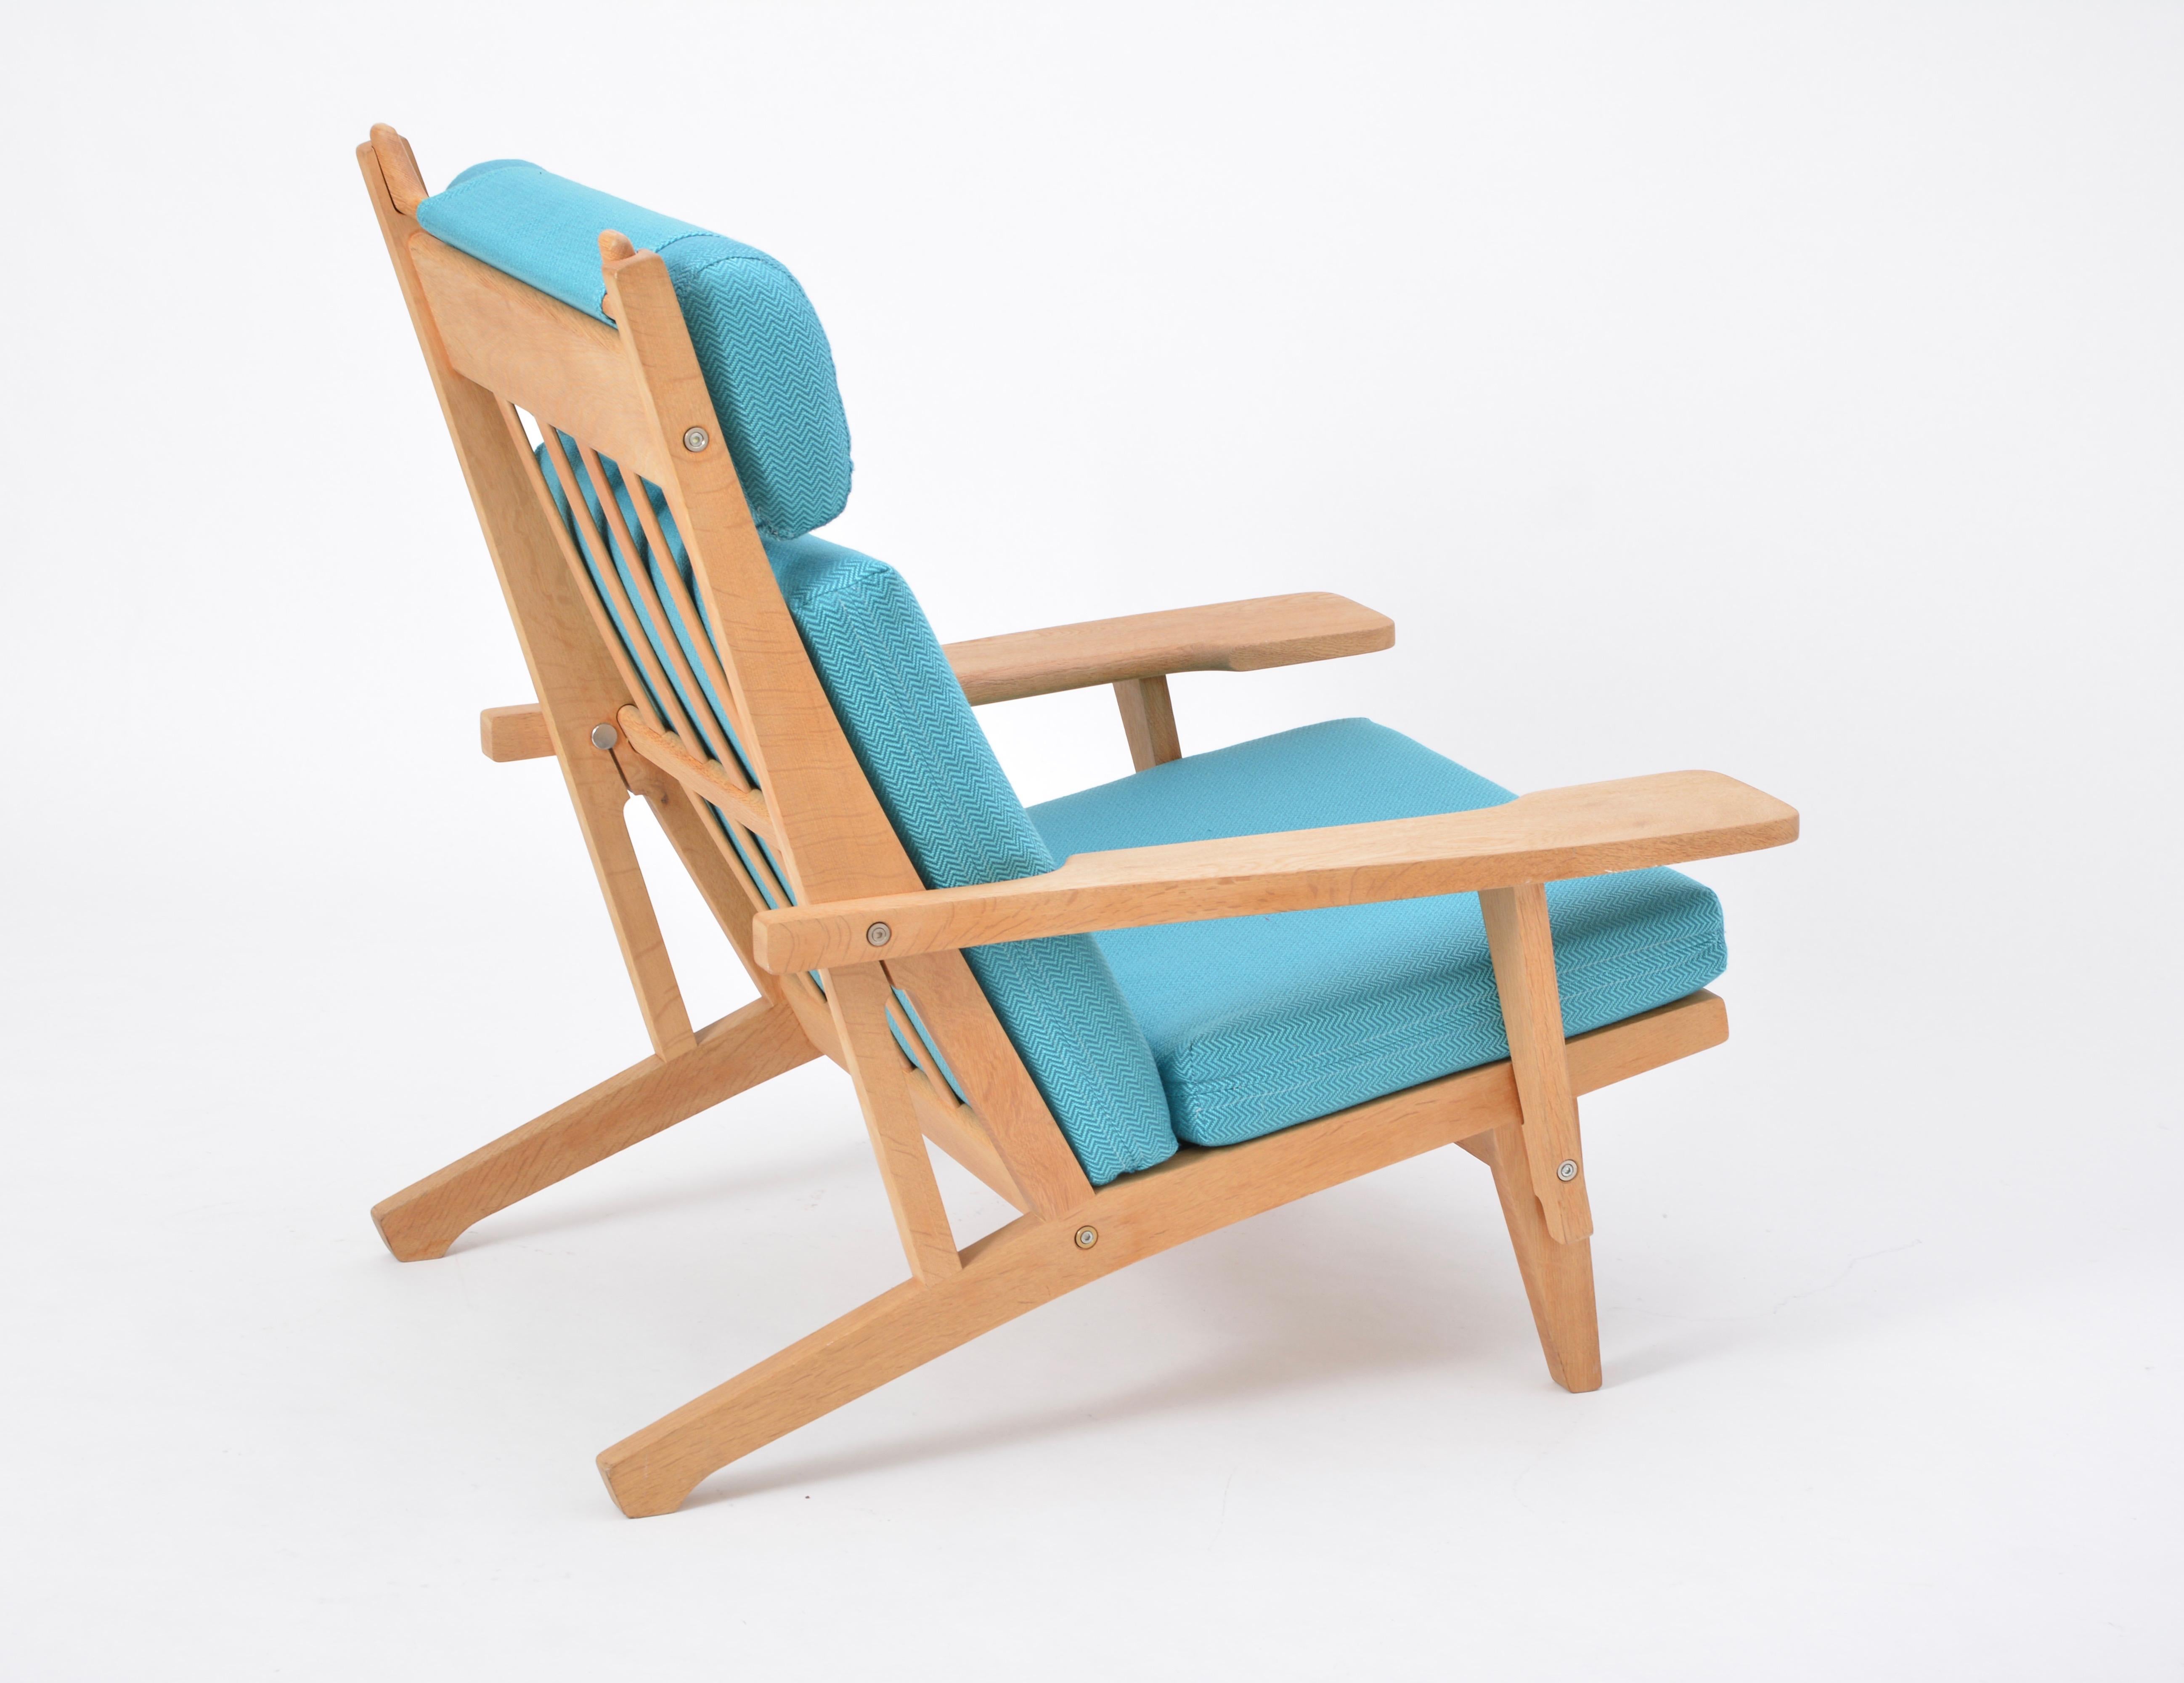 Turquoise Mid-Century Modern GE 375 Easy Chair by Hans J. Wegner for GETAMA 

This easy chair is a version of the GE 375 model with armrests and a high backrest that Hans J. Wegner designed for GETAMA in 1969. The frame is made from oak; the loose